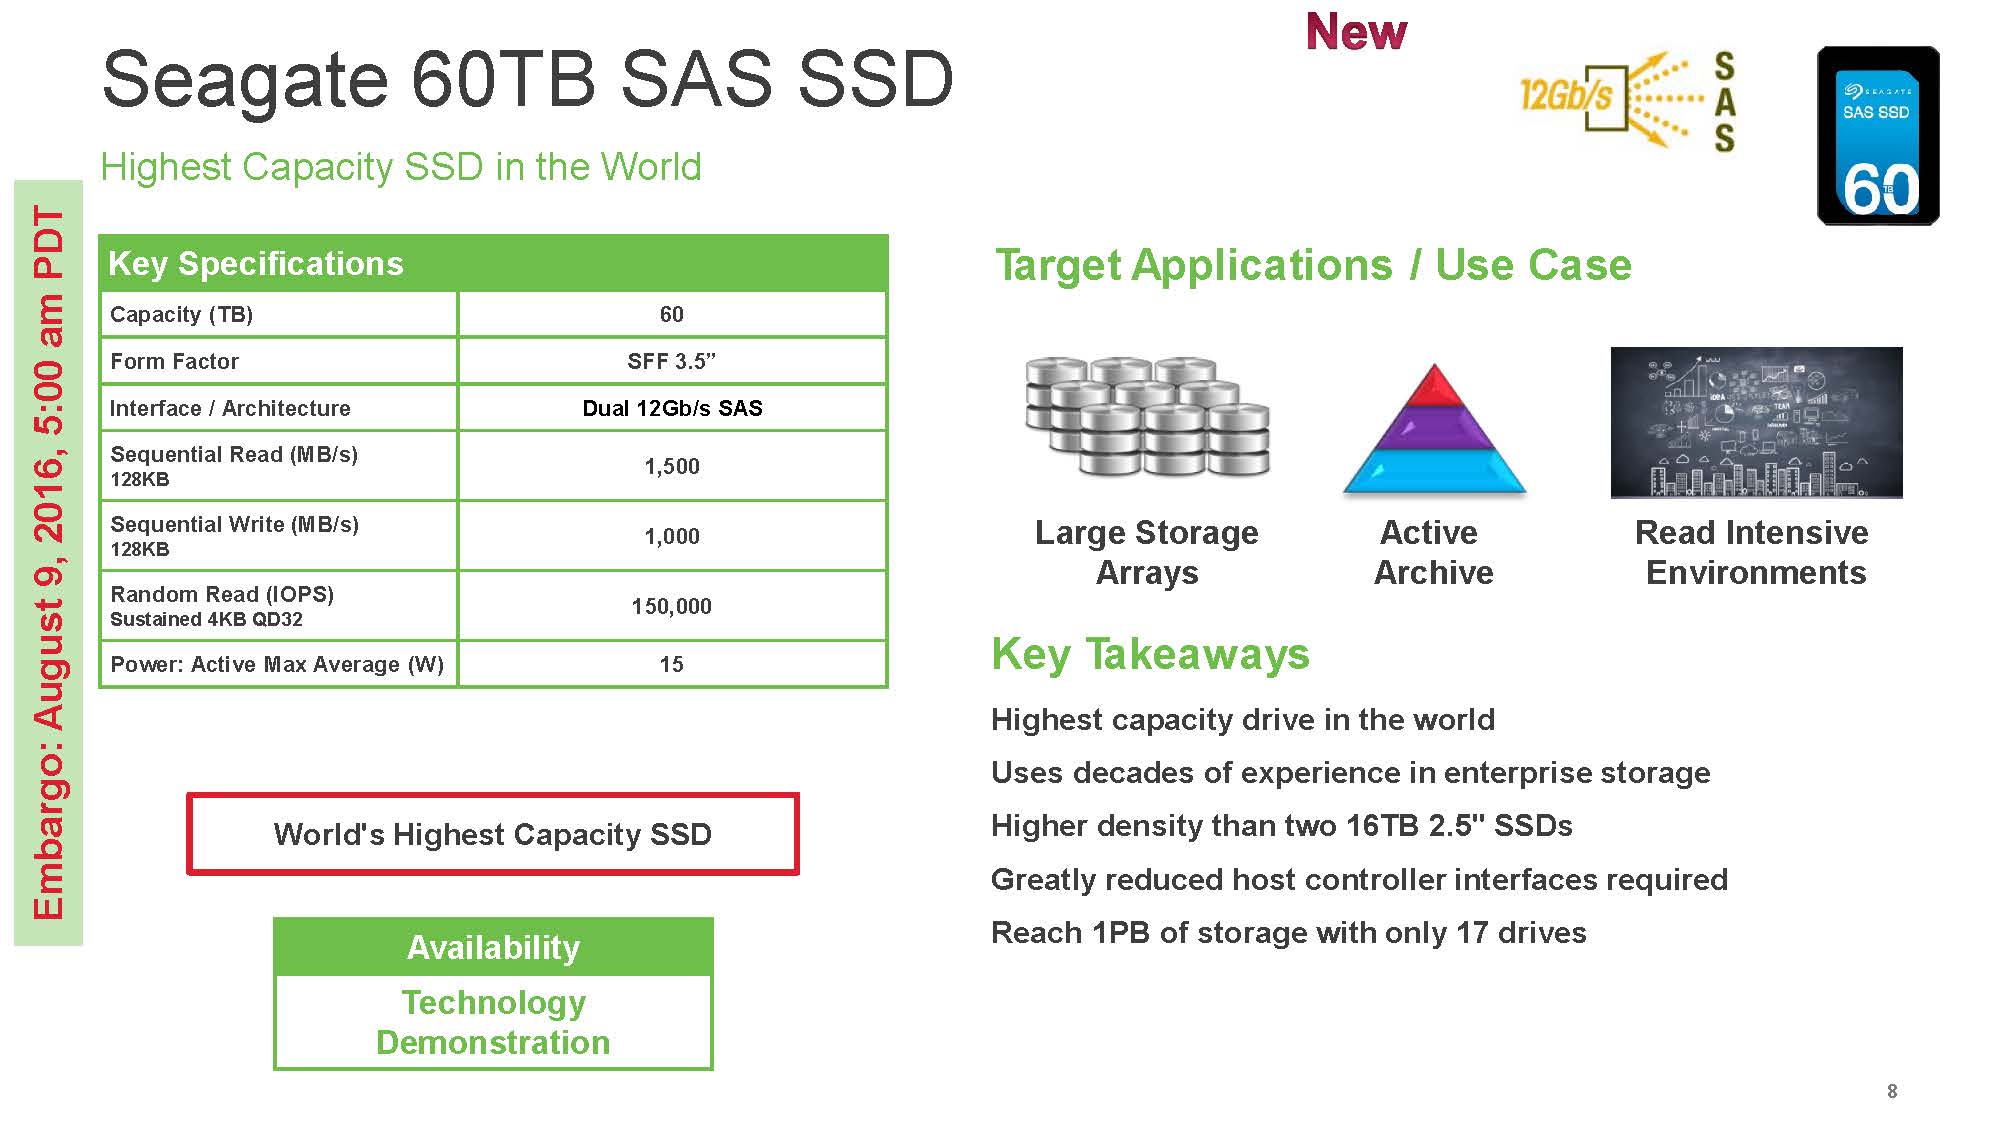 Seagate Unveils 60TB SAS SSD, Claims Highest Capacity Drive in the World